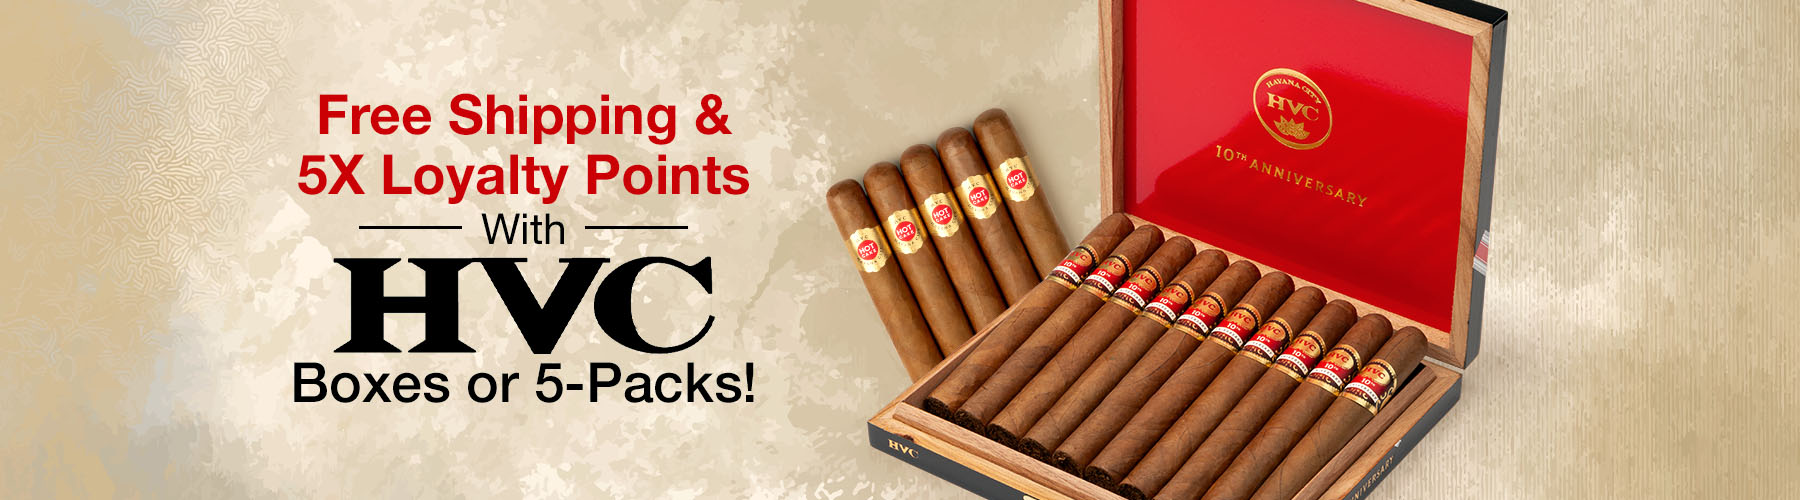 Free Shipping & 5X Loyalty Points with HVC boxes or 5-packs!